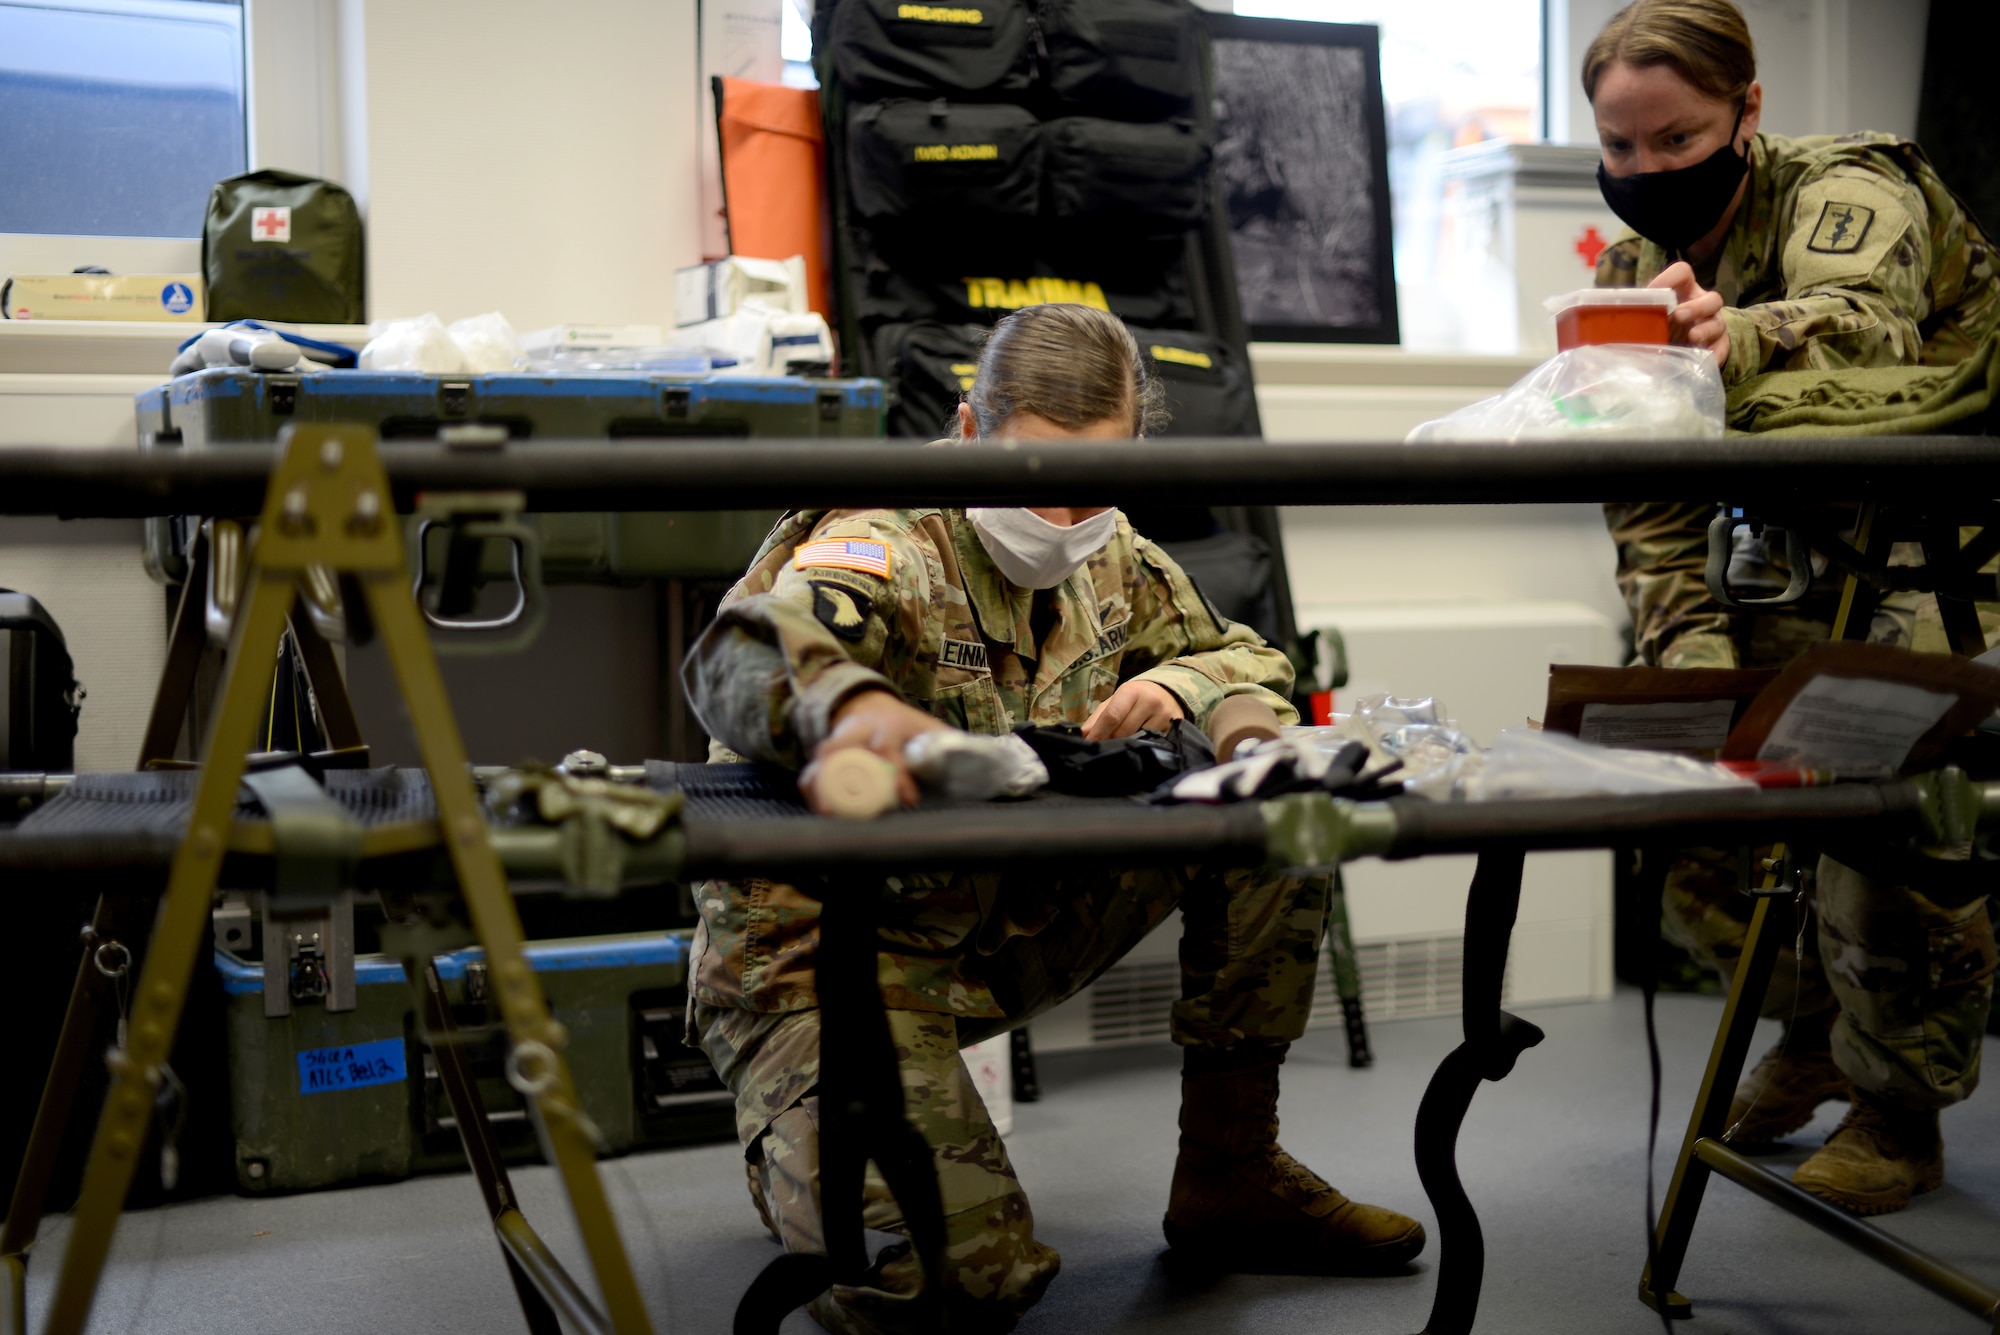 U.S. Army Capt. Jessica Weinman, 67th Forward Resuscitative Surgical Team emergency nurse, center, and Sgt. Sara Lind, 67th FRST combat medic, right, set up the resuscitation section for patient care prior to a training scenario at the Medical Simulation Training Center, Ramstein Air Base, June 18, 2020.